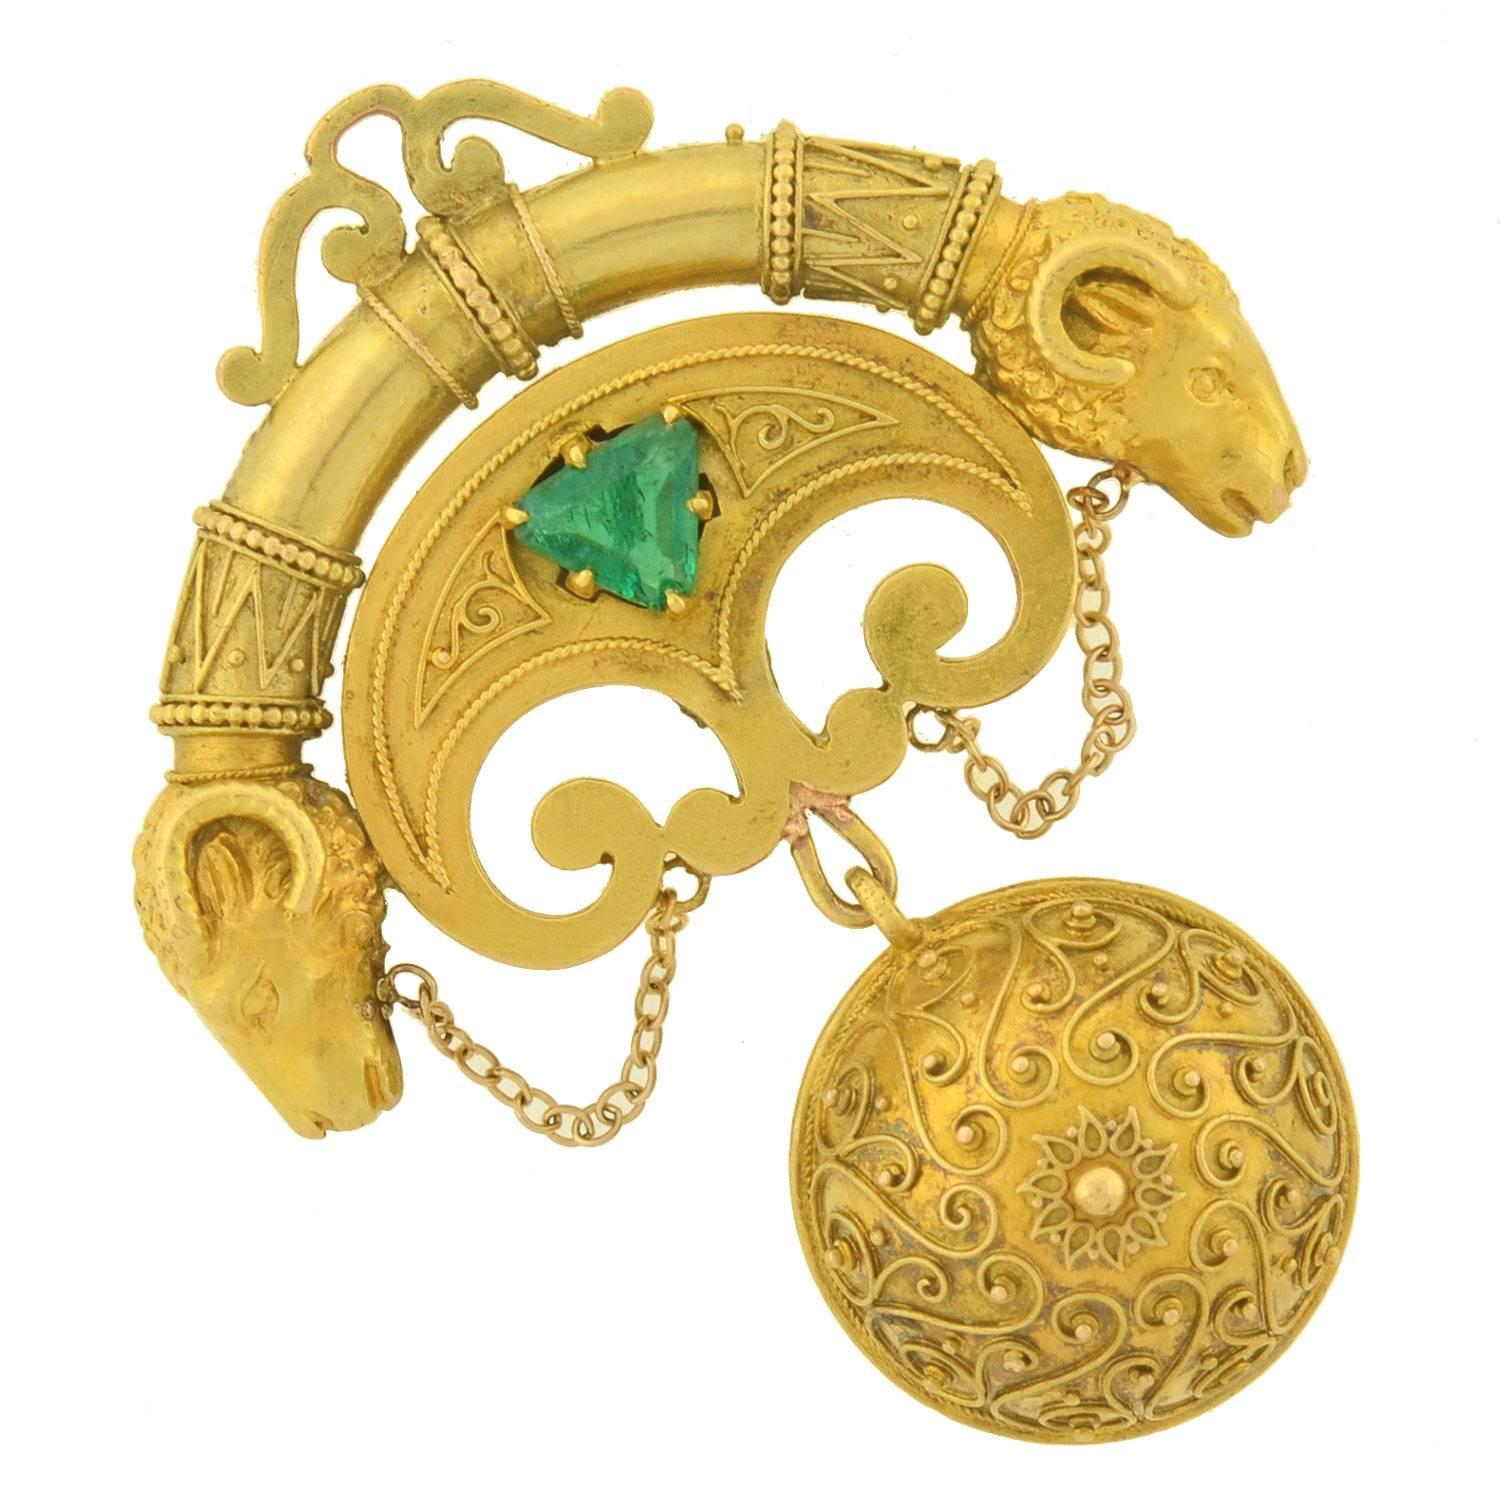 A truly exceptional Etruscan pendant from the Victorian (ca1880) era! Made of vibrant 15kt yellow gold, the pendant has an elaborate design that features detailed Etruscan wirework decorating the entire front surface. The pendant begins with an